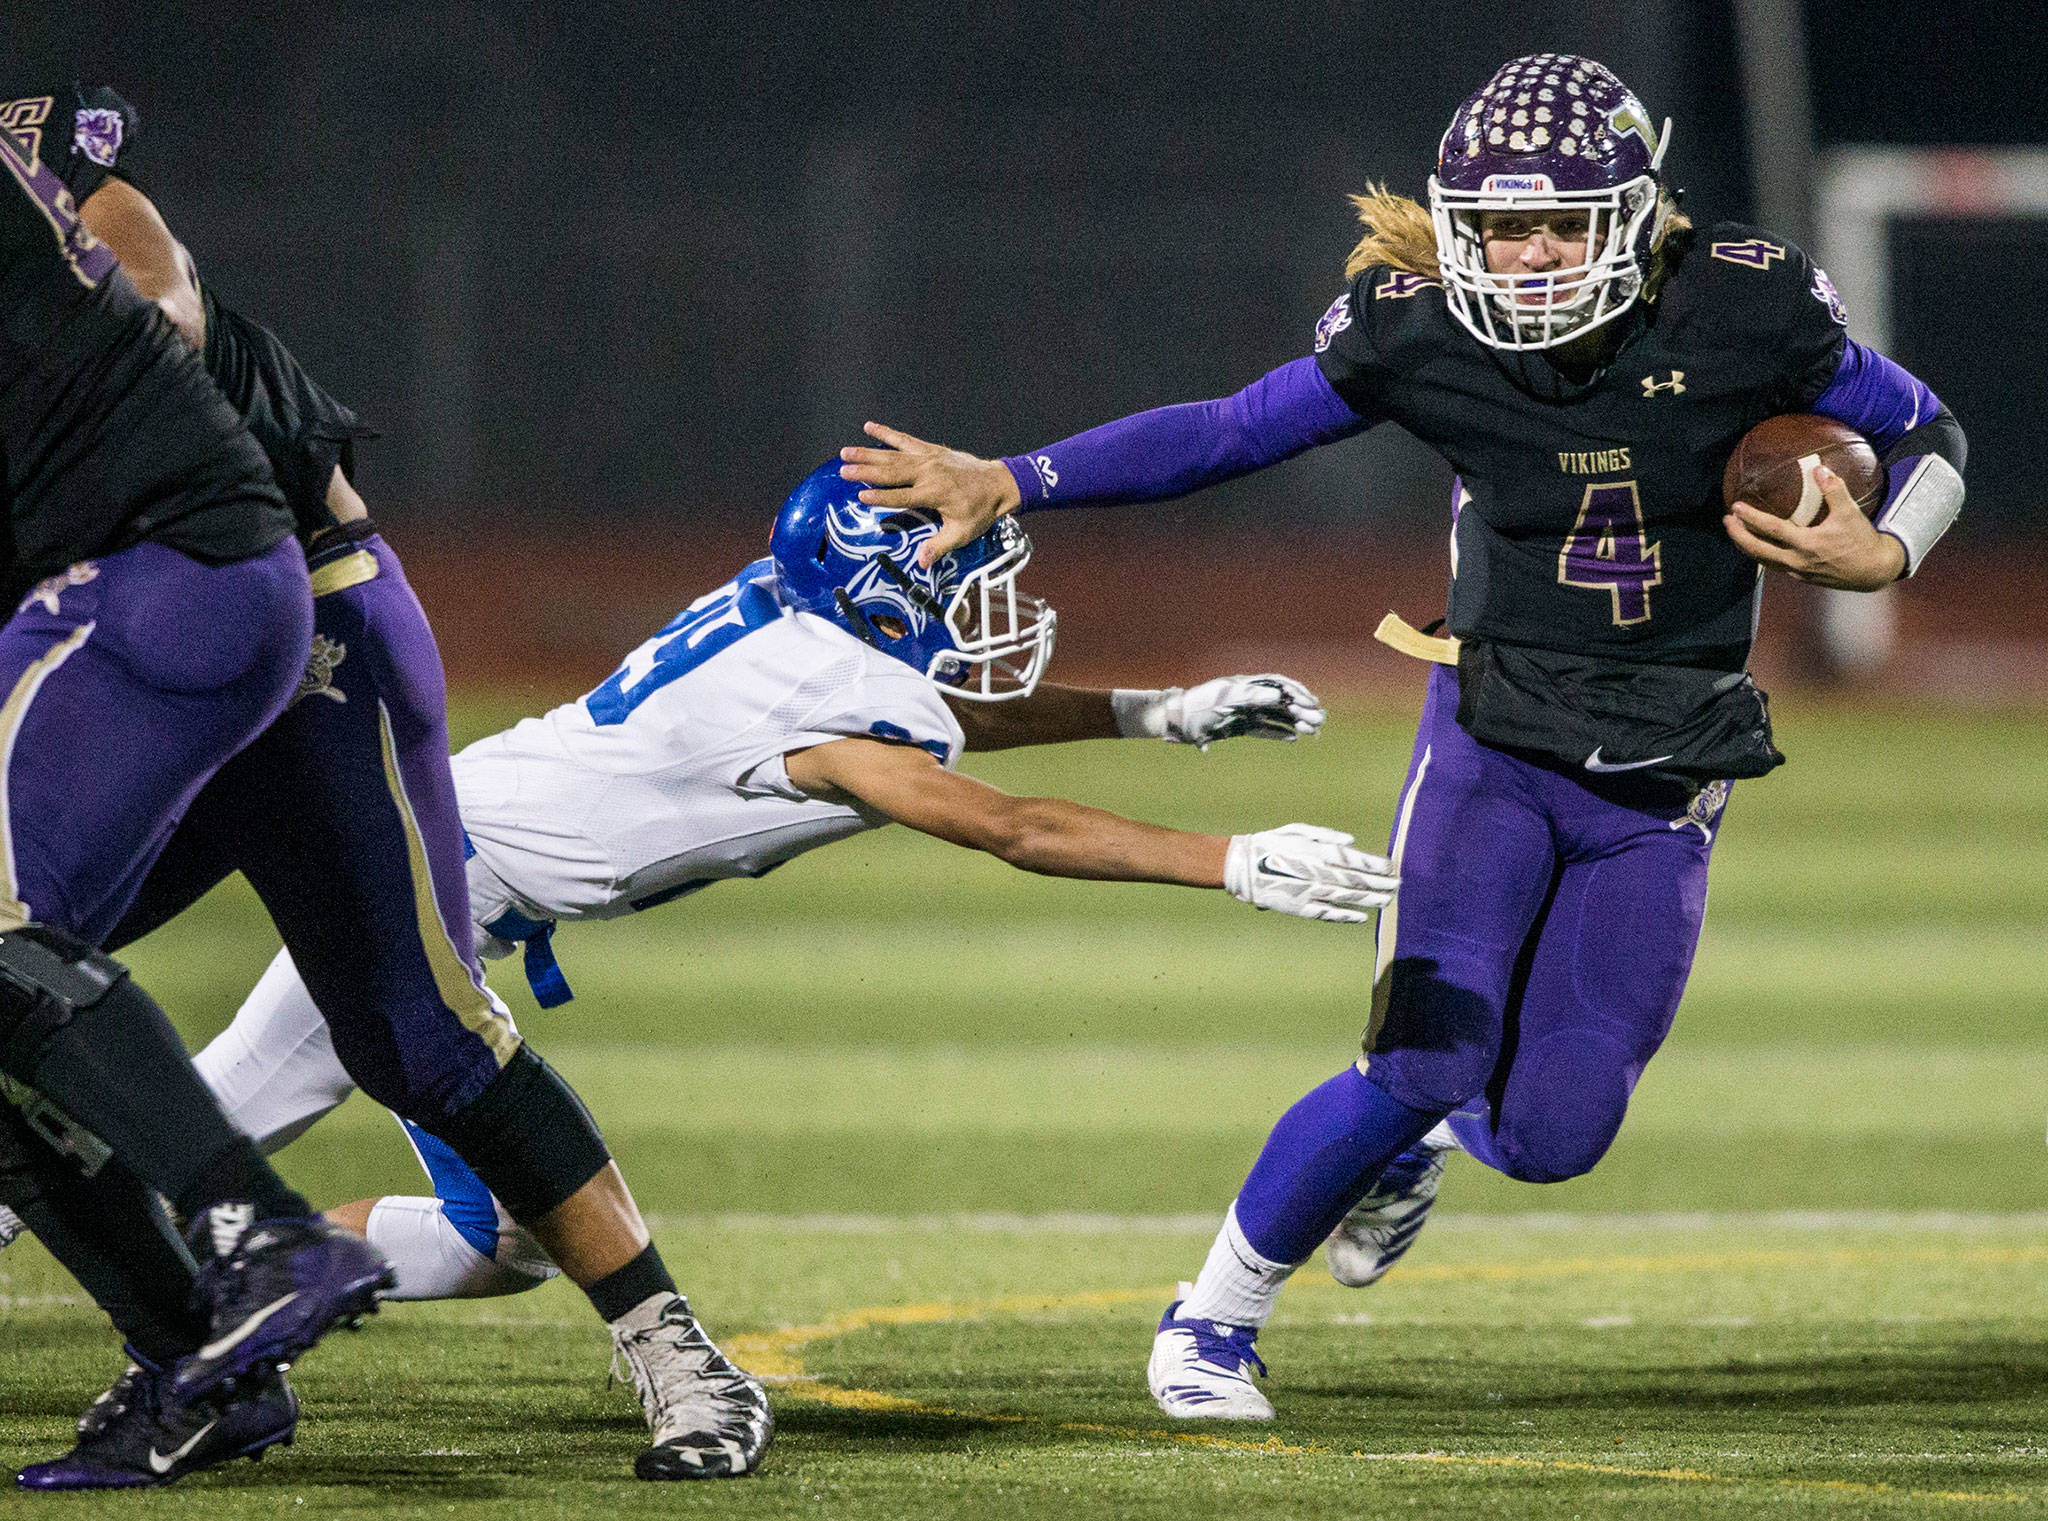 Lake Stevens quarterback Tre Long escapes a tackle during a 4A state playoff game against Curtis on Nov. 9 in Lake Stevens. (Olivia Vanni / The Herald)